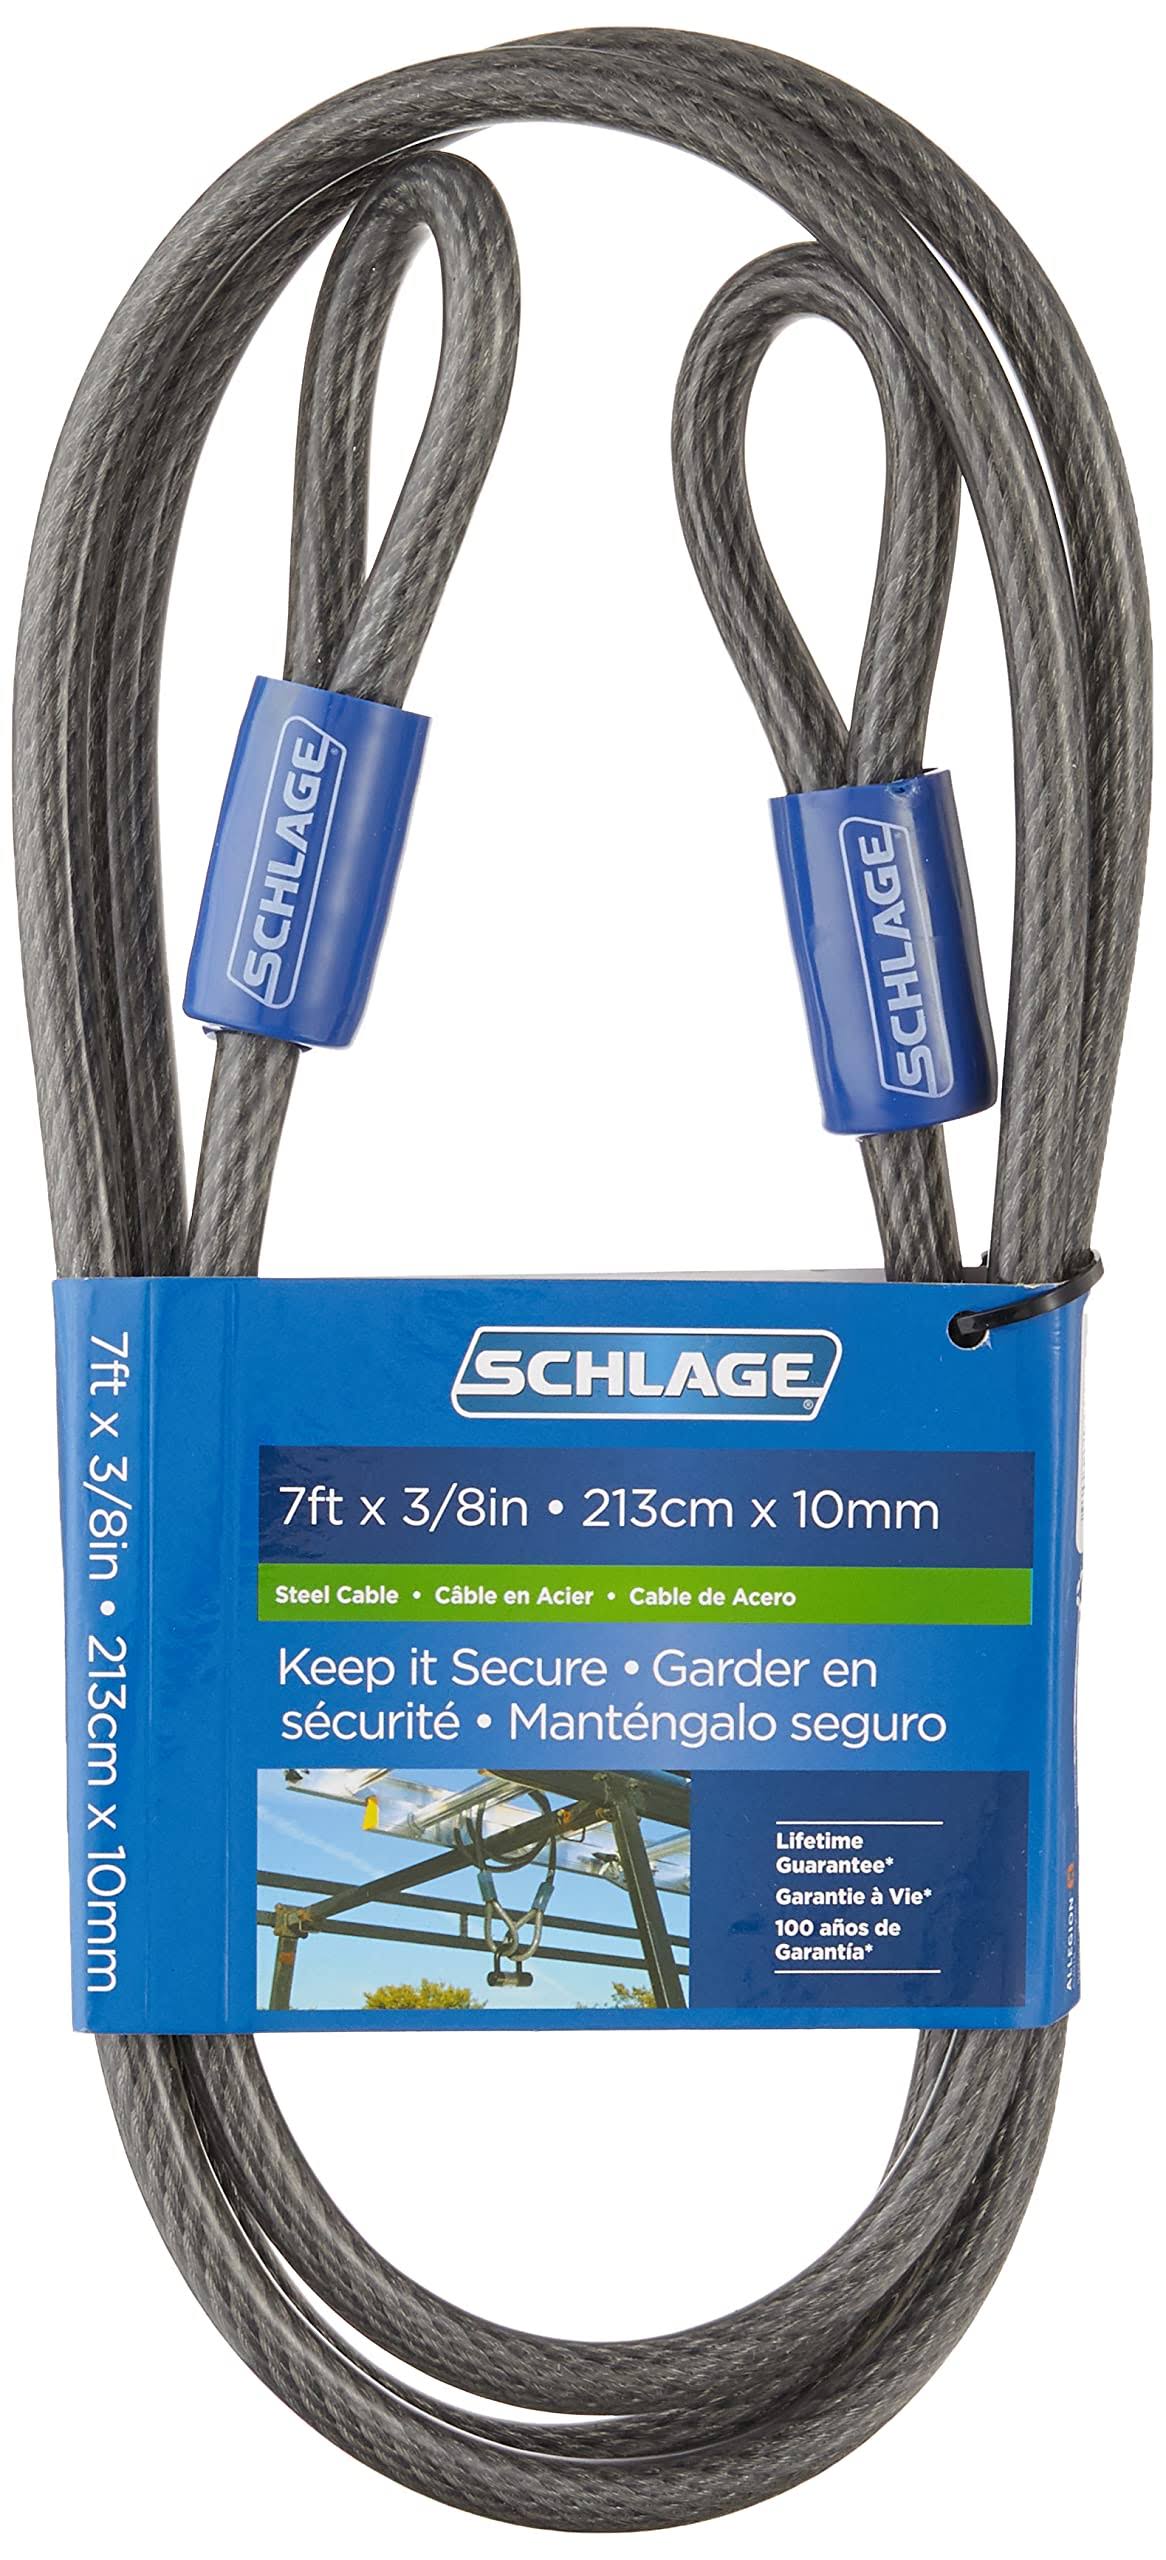 Schlage 999256 Flexible Steel Cable - 7 ft x 0.375 in